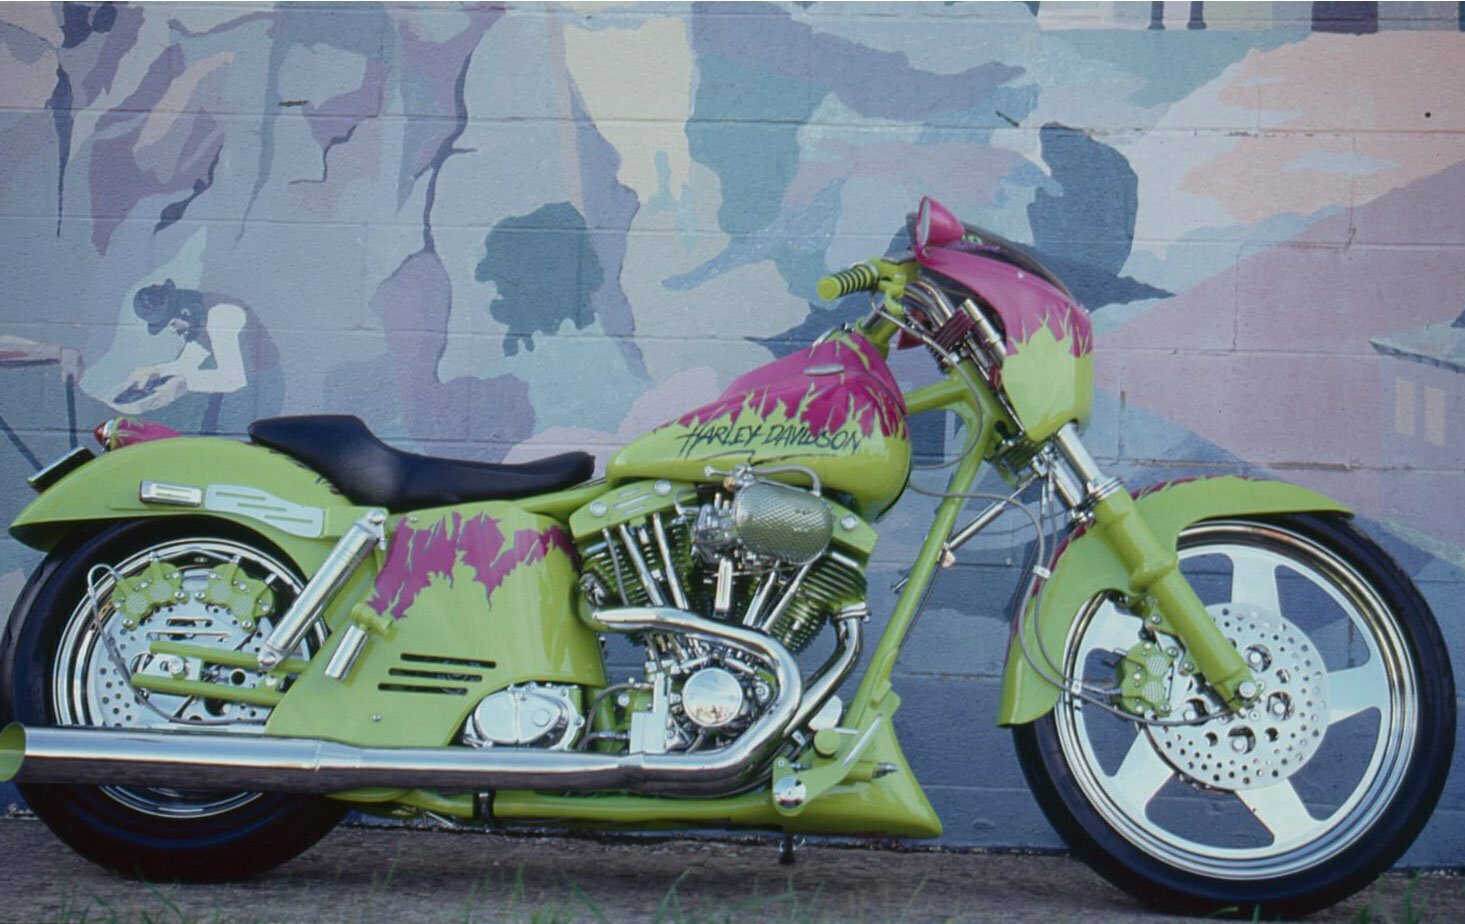 This green and magenta custom couldn’t be missed at the 53rd annual Sturgis motorcycle rally.